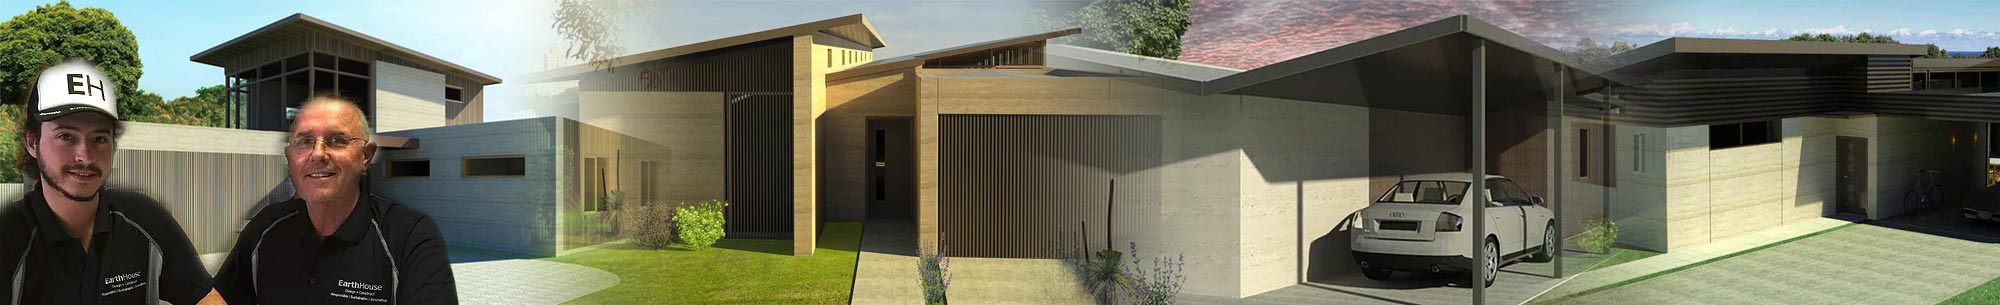 Find out more aboutEarth House and the team that designs and builds rammed earth houses and homes in Melbourne and the Mornington Peninsula